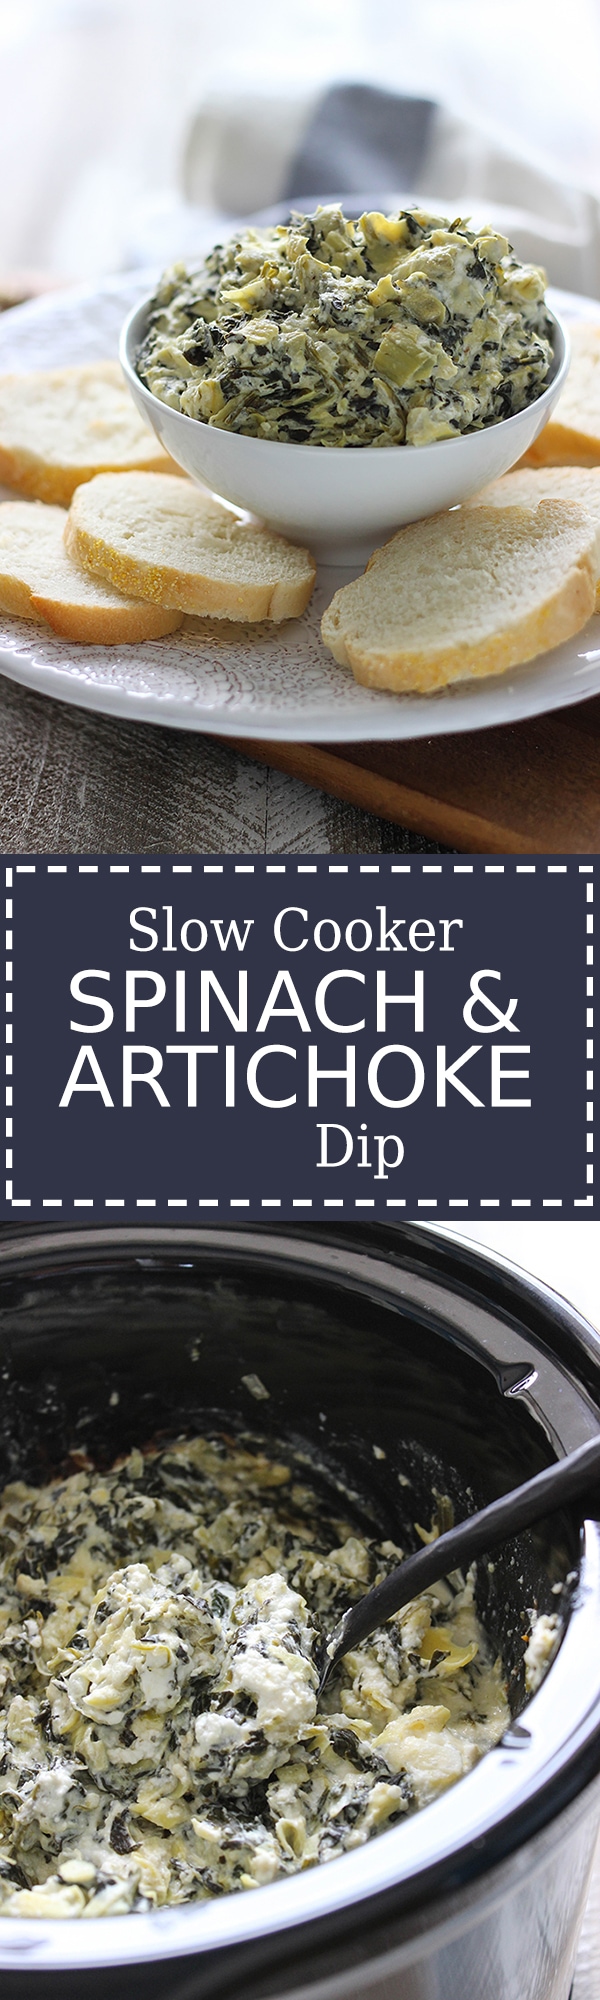 Slow Cooker Spinach and Artichoke Dip - The Cooking Jar